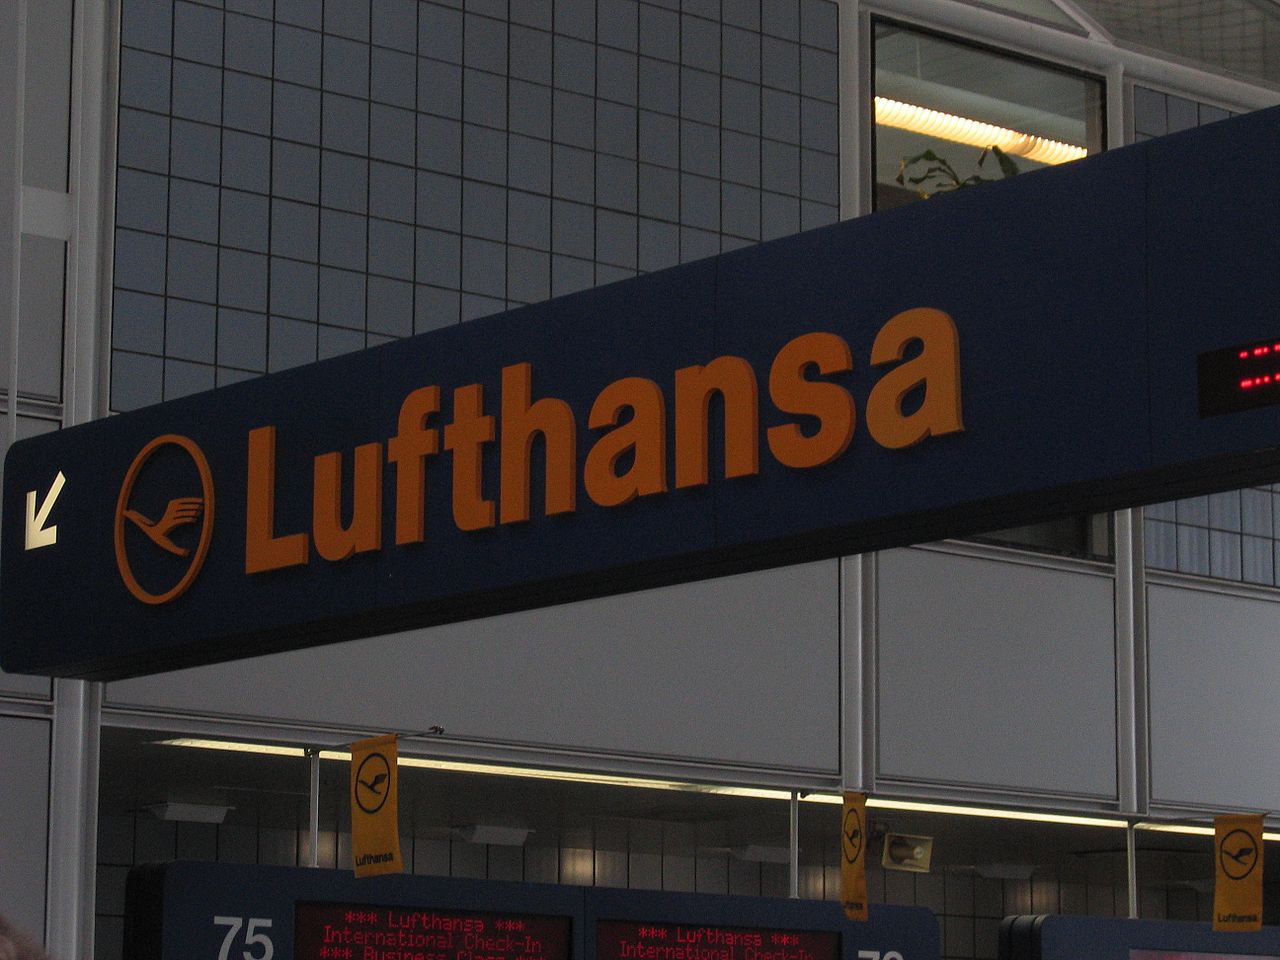 Lufthansa Airlines logo at Chicago O'Hare airport